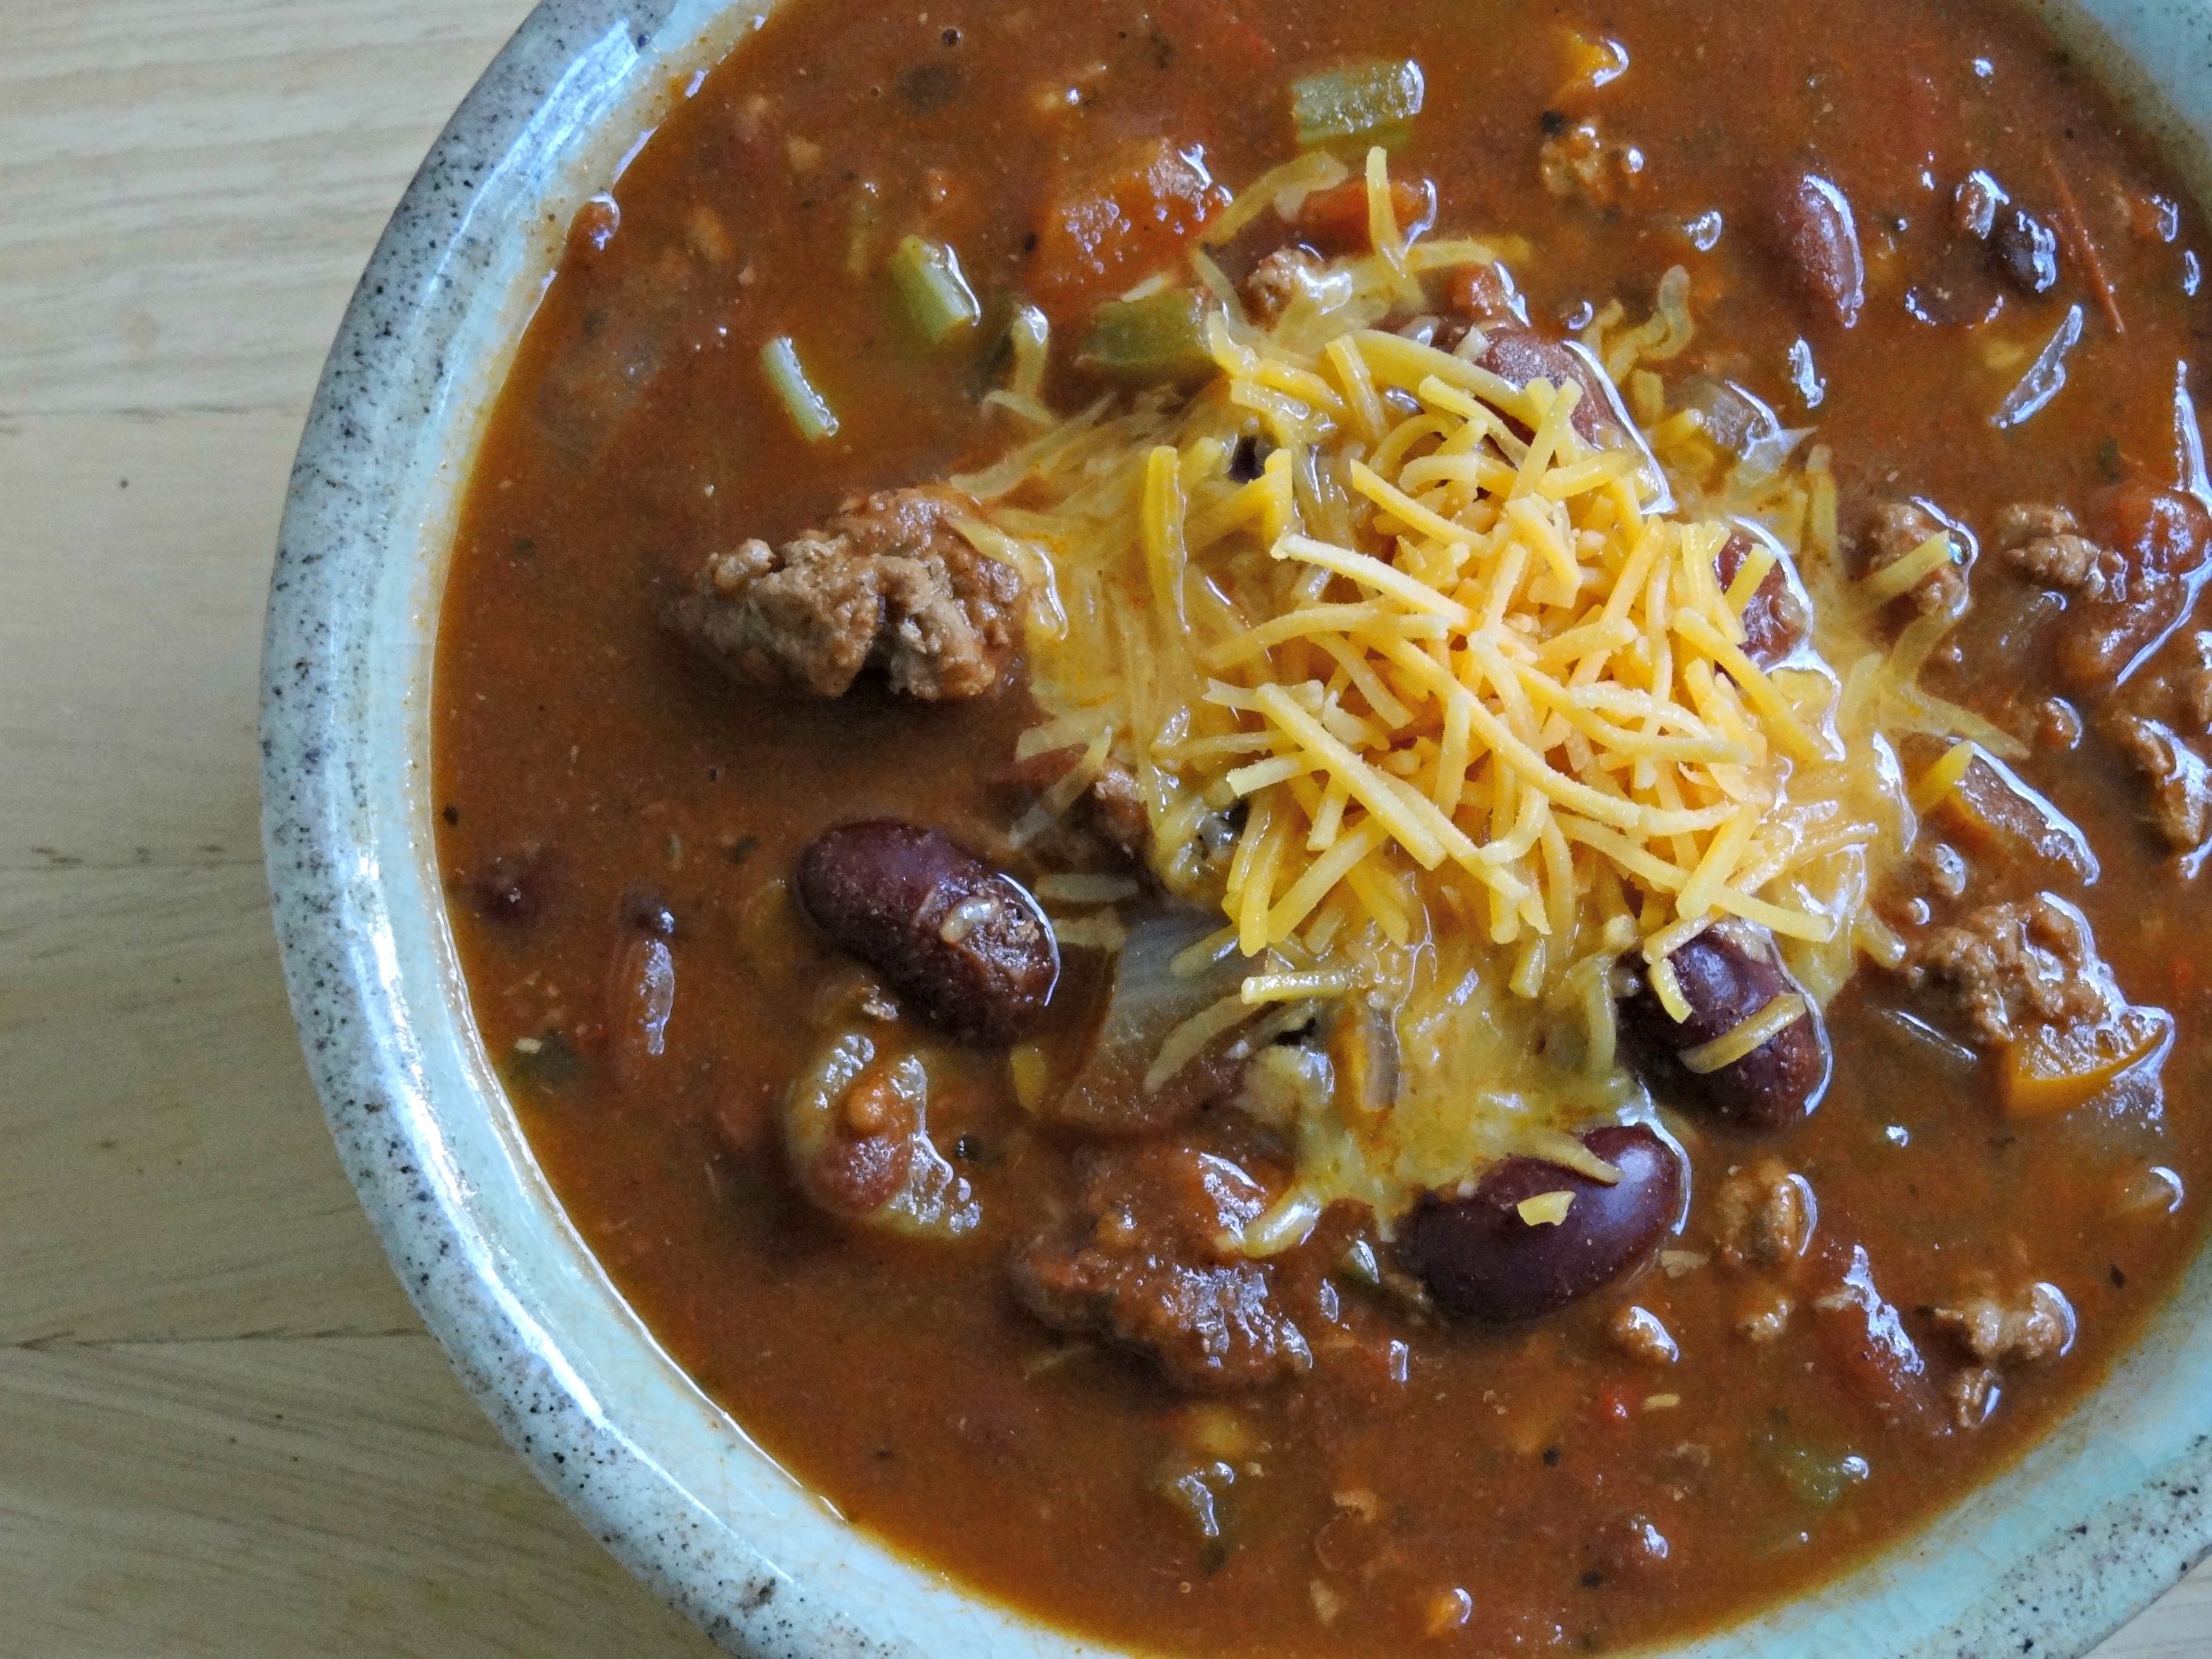 West Asheville Life My Turkey Chili Recipe: The Secret's Out! - West ...